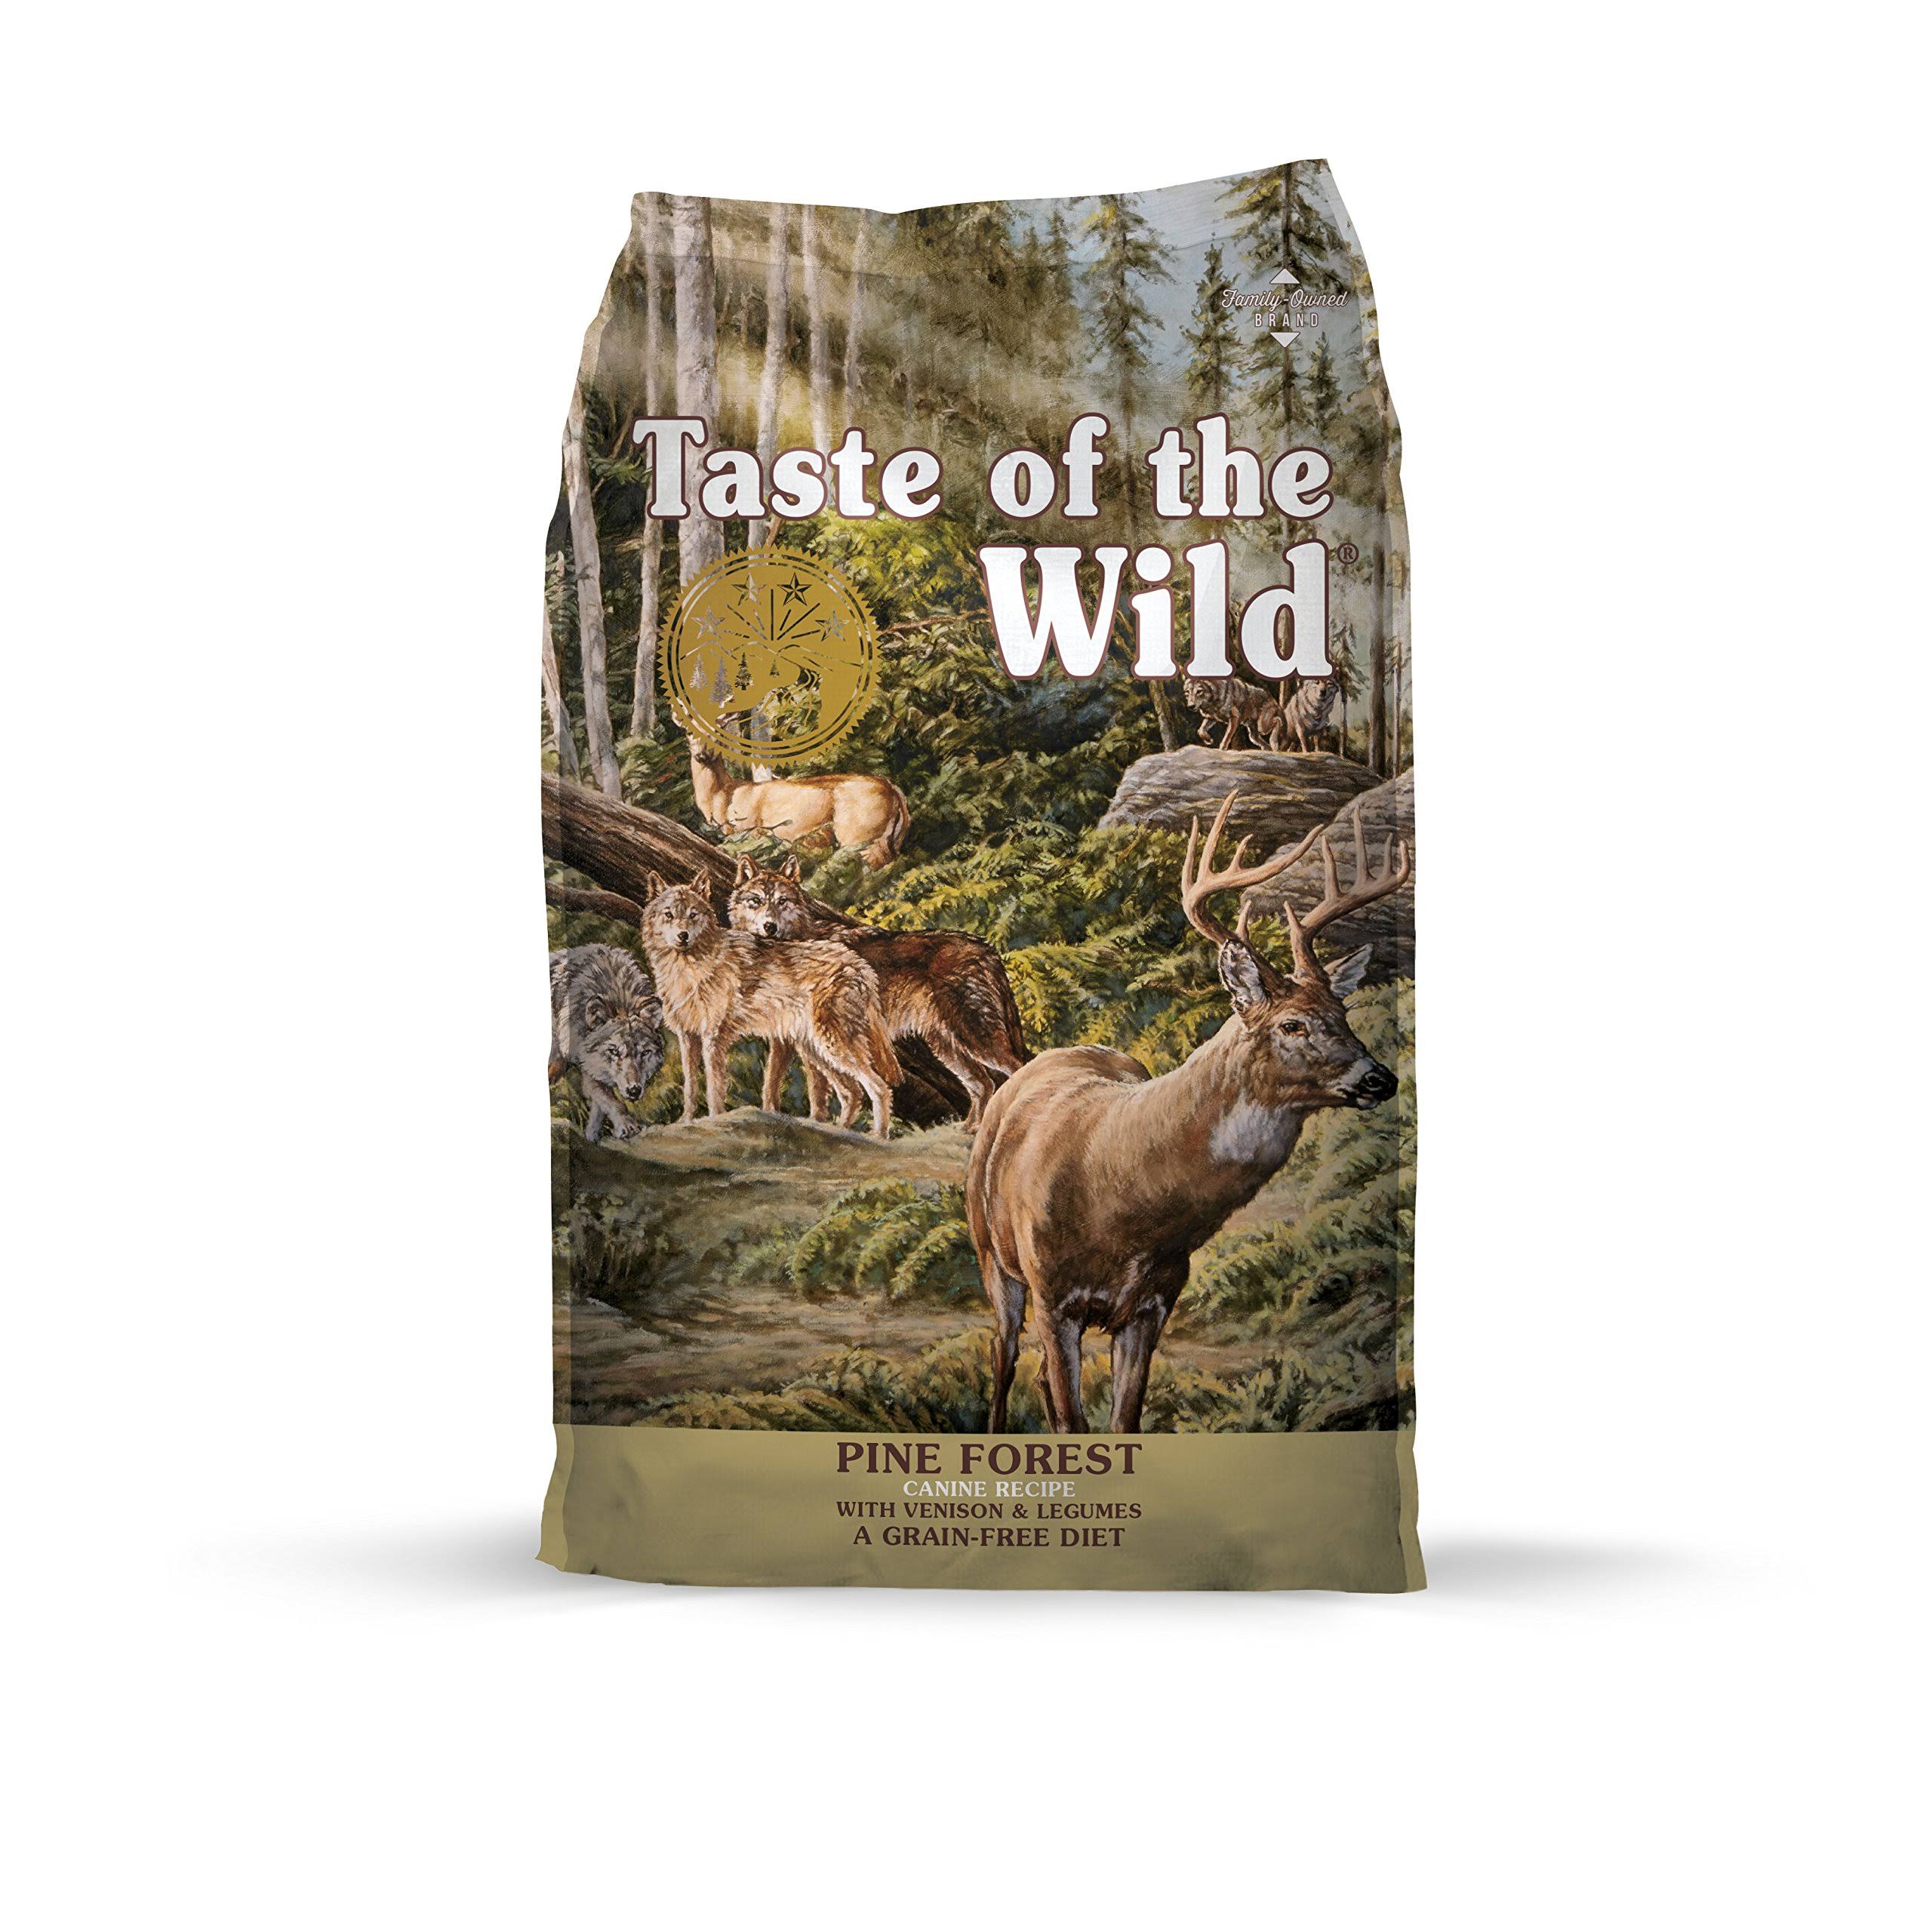 Taste of The Wild Pine Forest Dog Food 5 lbs